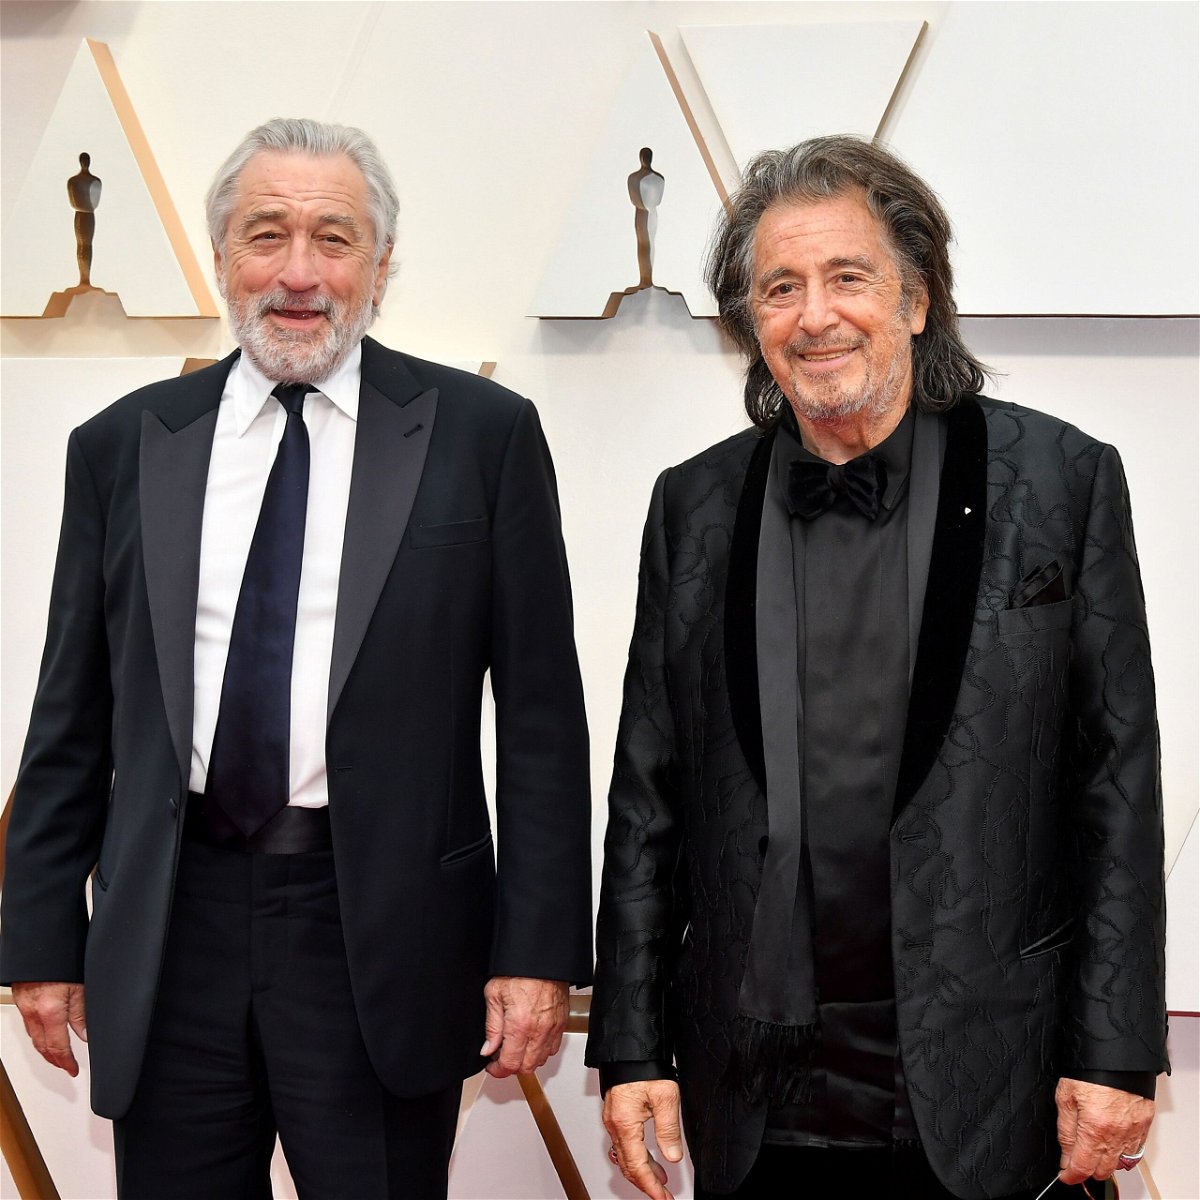 <i>Amy Sussman/Getty Images</i><br/>Robert De Niro (left) and Al Pacino are pictured here in 2020.